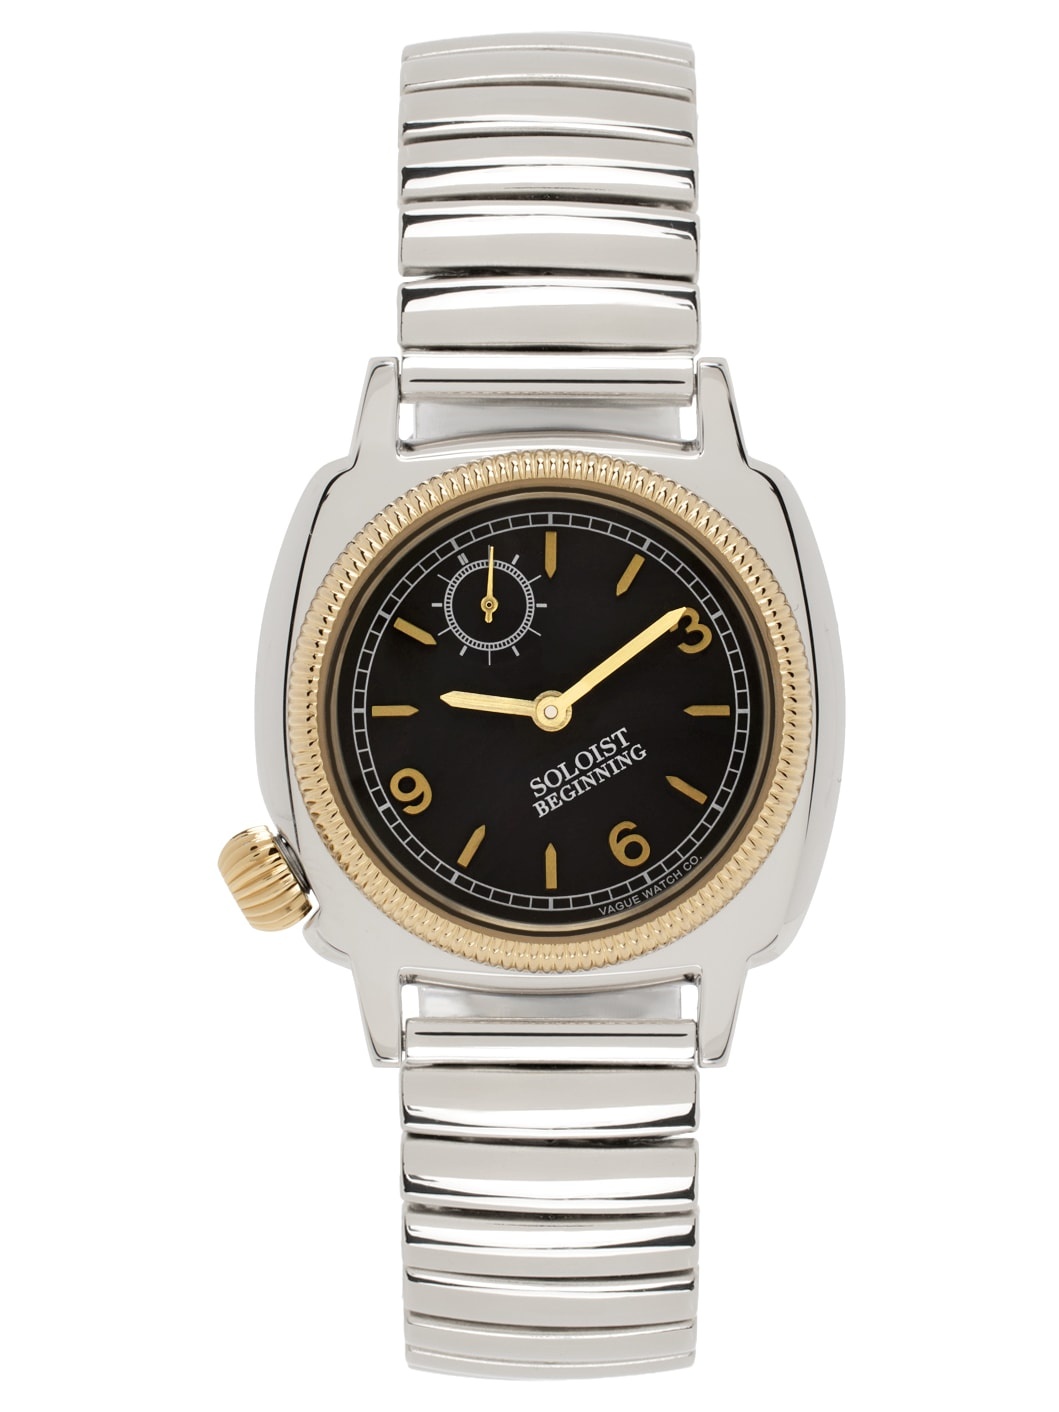 Silver & Gold VAGUE WATCH Co. Edition Watch - 1